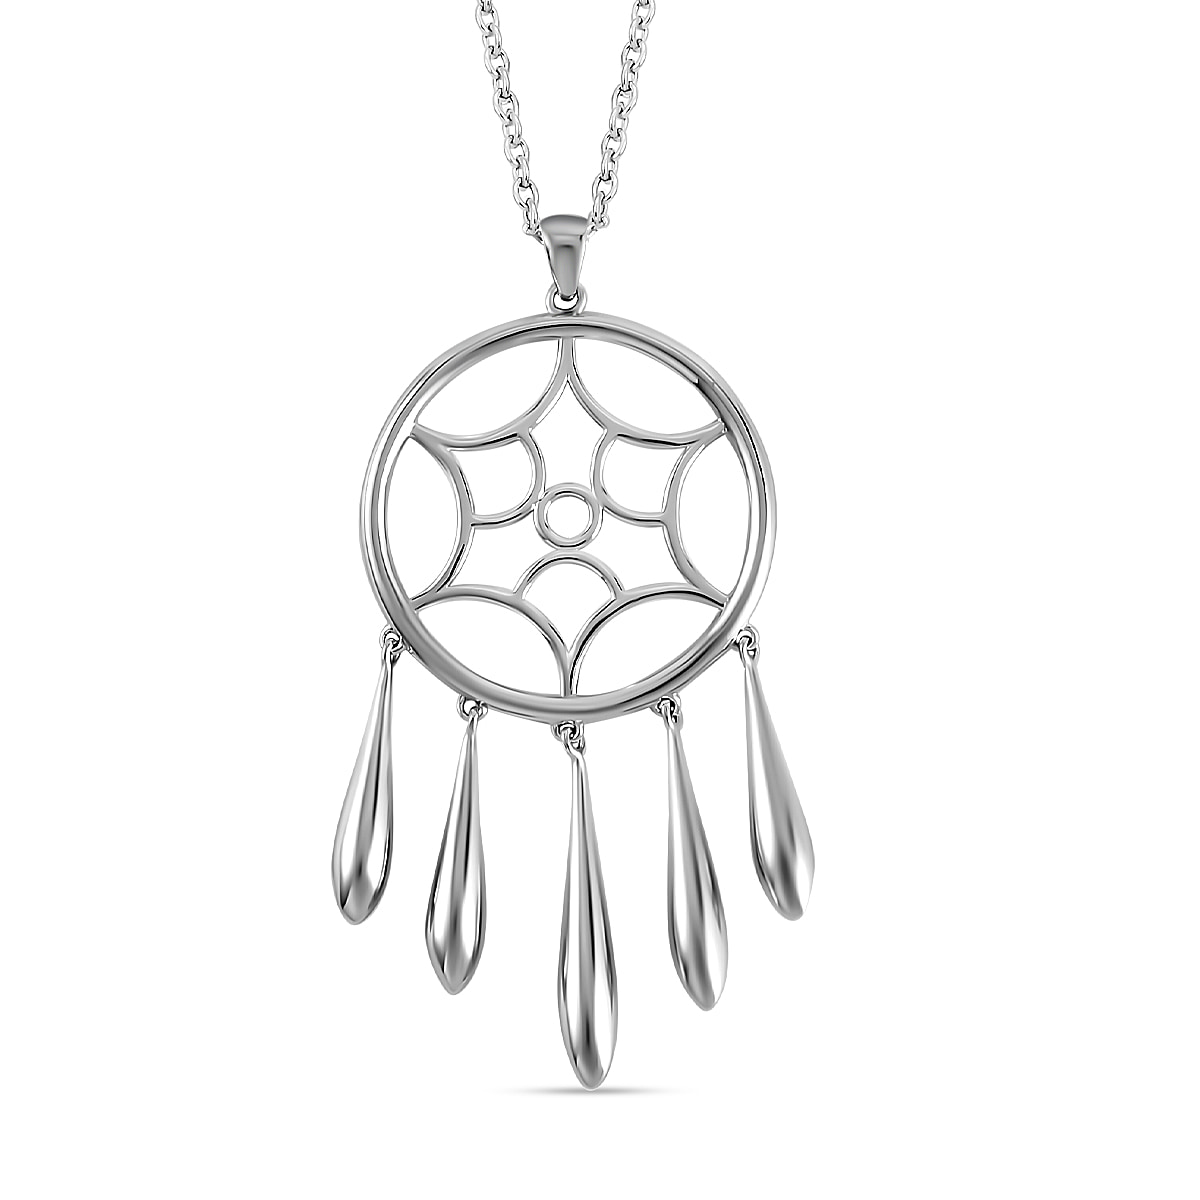 Lucy Q Dream Catcher Collection - Platinum Overlay Sterling Silver Dream Catcher Pendant with Chain (Size 20)